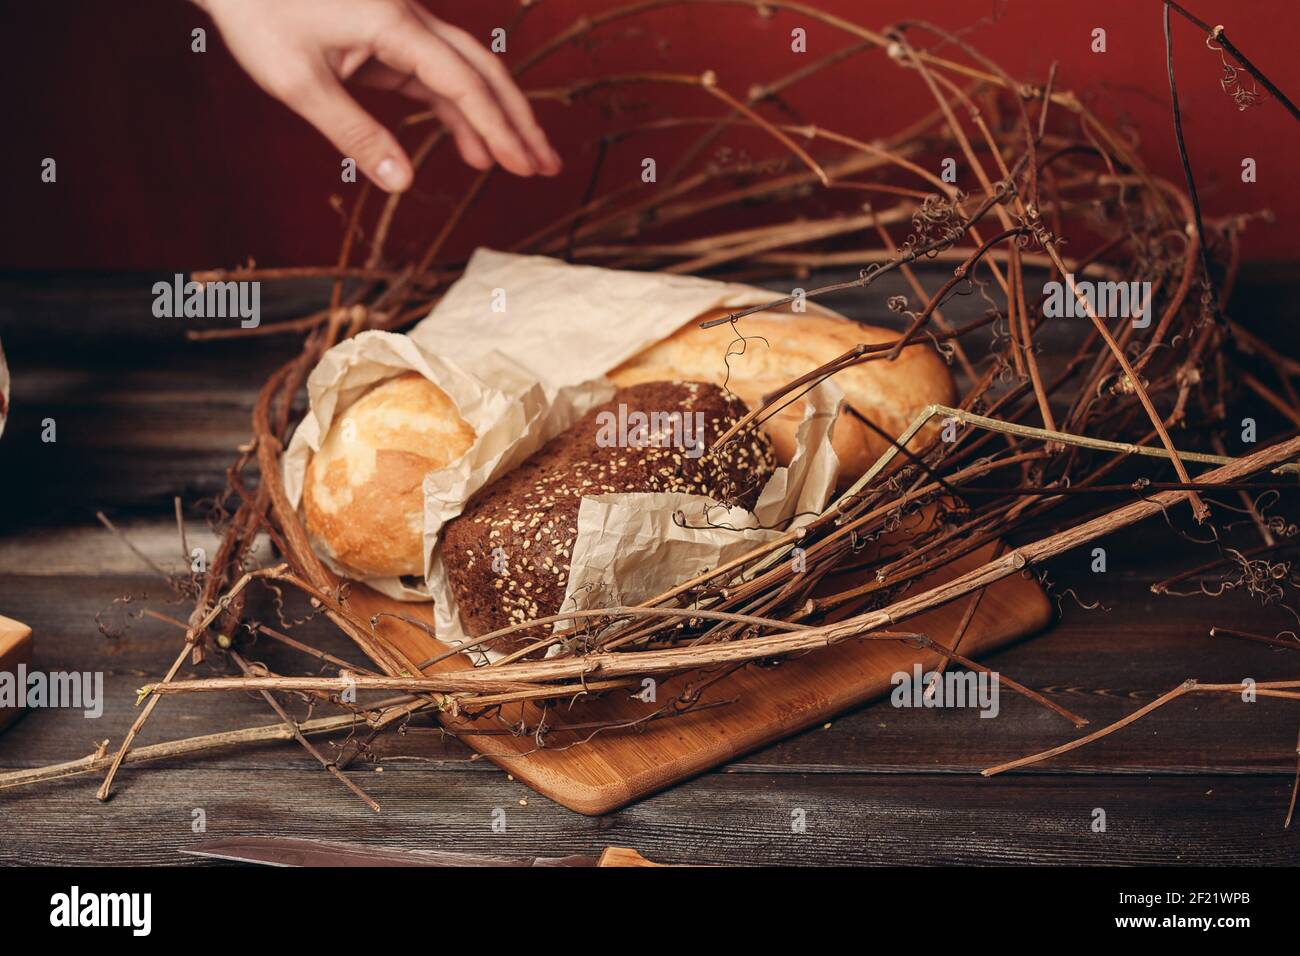 https://c8.alamy.com/comp/2F21WPB/a-loaf-of-bread-lies-on-the-branches-of-the-nest-on-a-wooden-table-on-a-red-background-2F21WPB.jpg